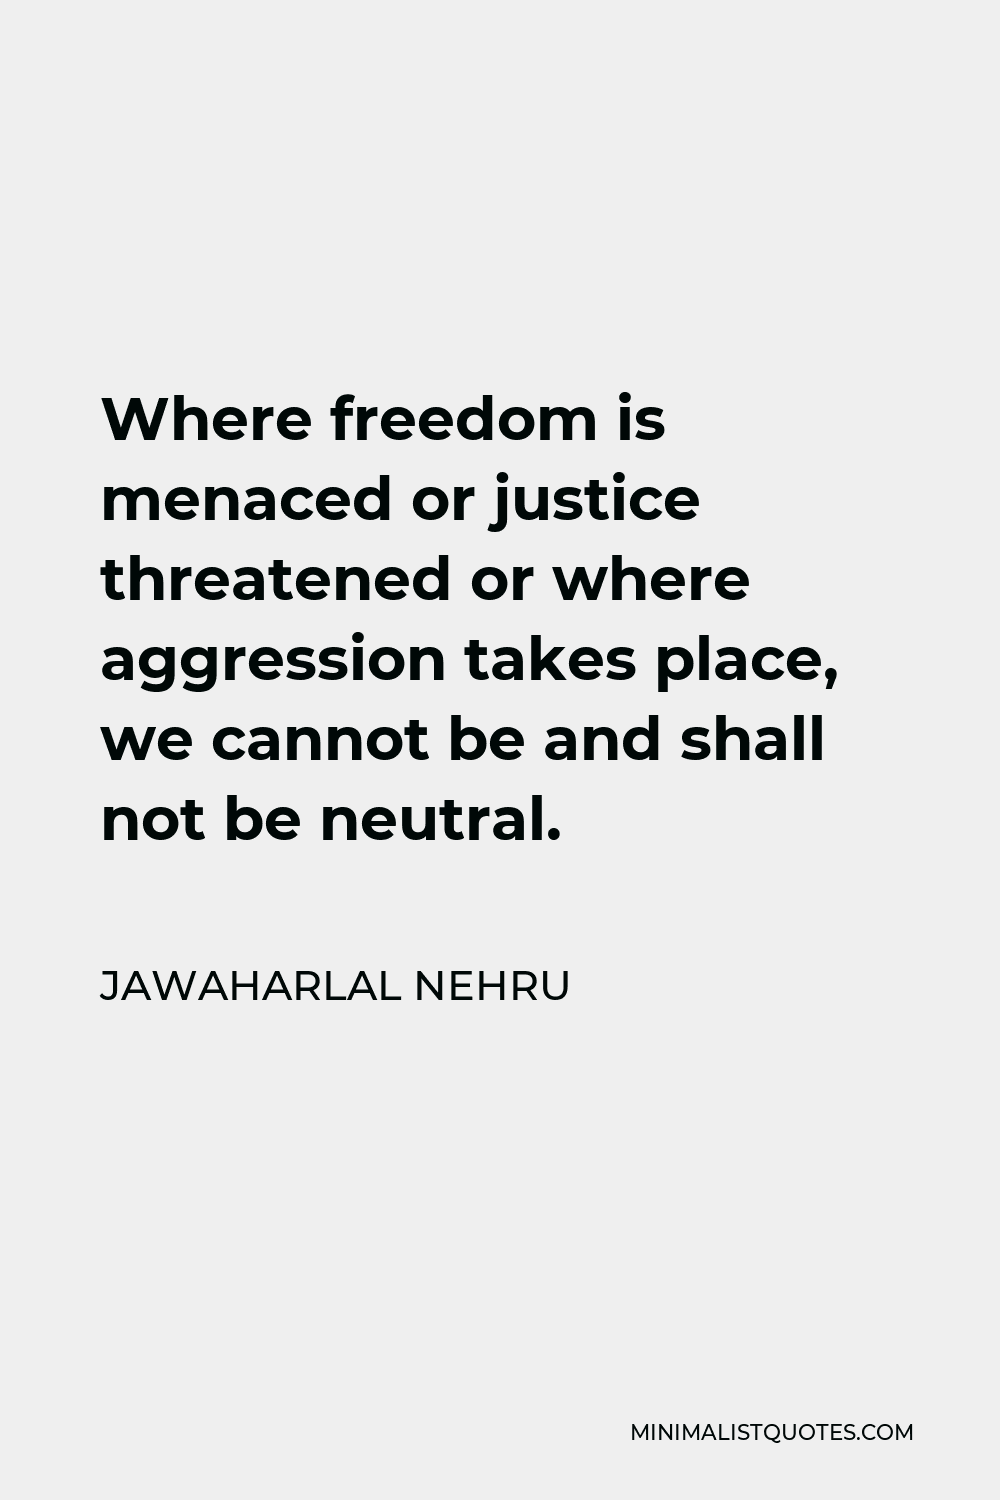 Jawaharlal Nehru Quote - Where freedom is menaced or justice threatened or where aggression takes place, we cannot be and shall not be neutral.